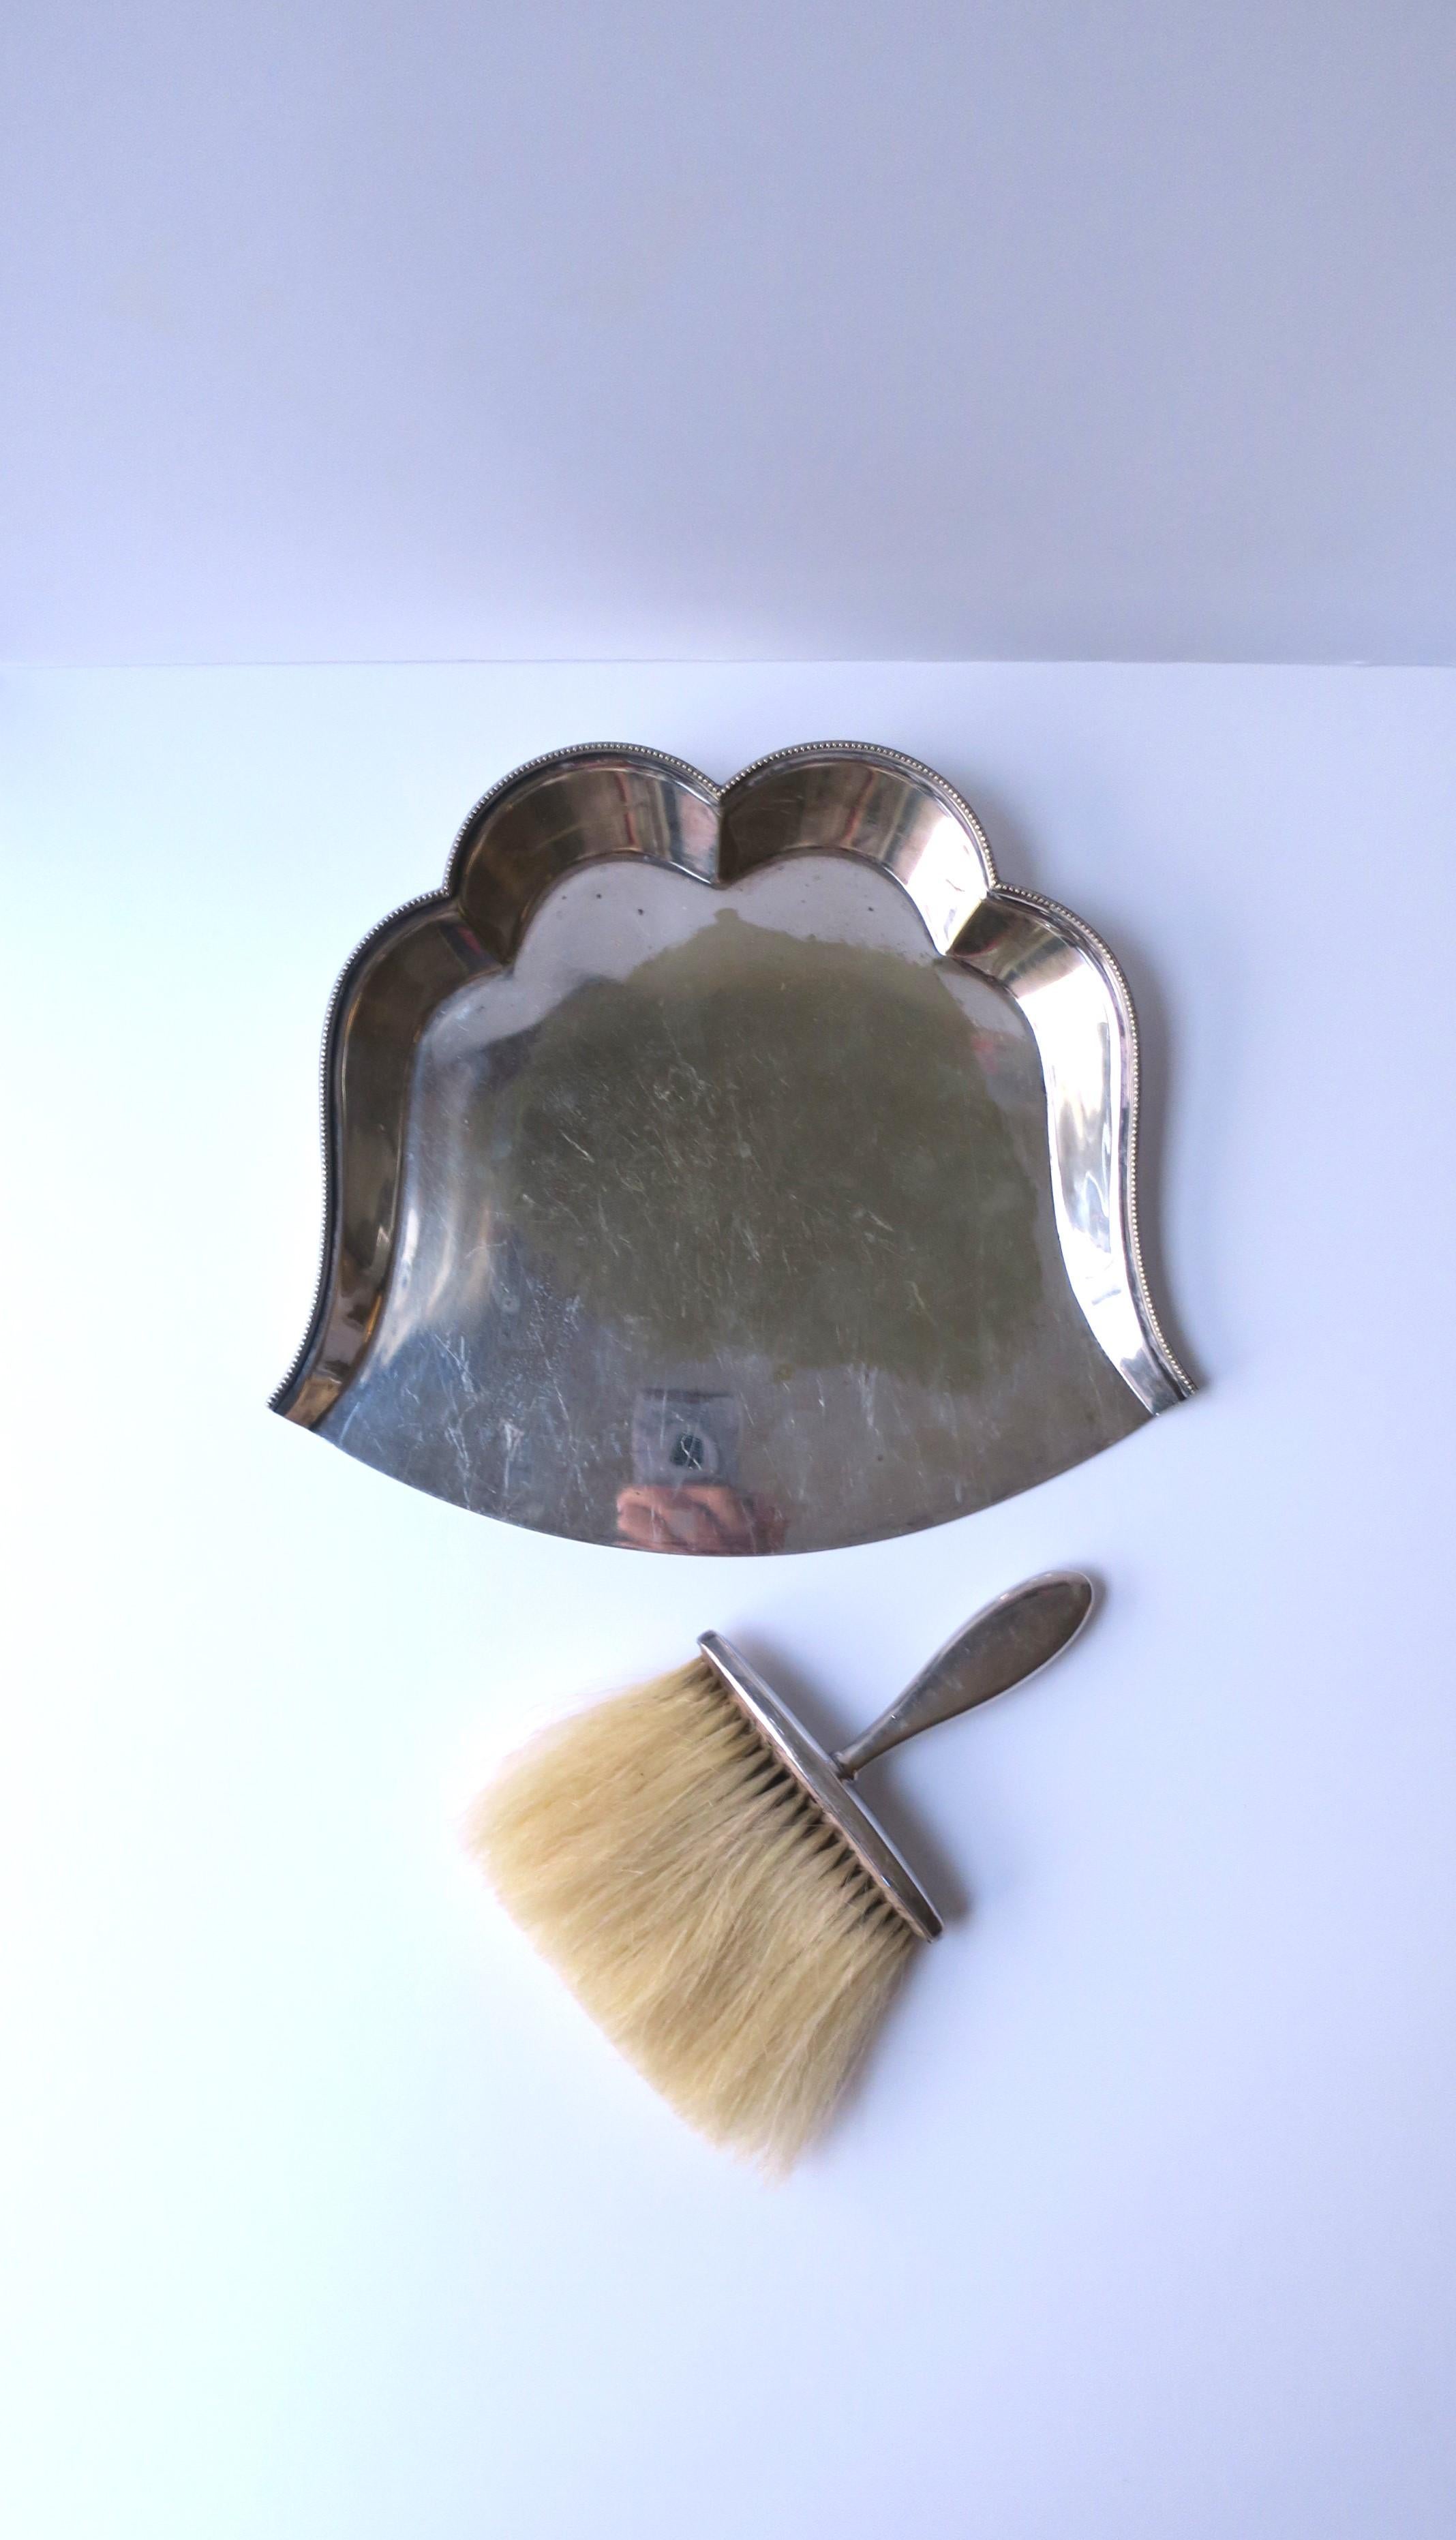 A fine English silver-plate table crumb pan and sweeper whisk by Hardy Bros Sidney & Brisbane, circa 20th-century, England. With makers' mark on both as shown in images. 

Dimensions: 
Pan/tray: 1.75